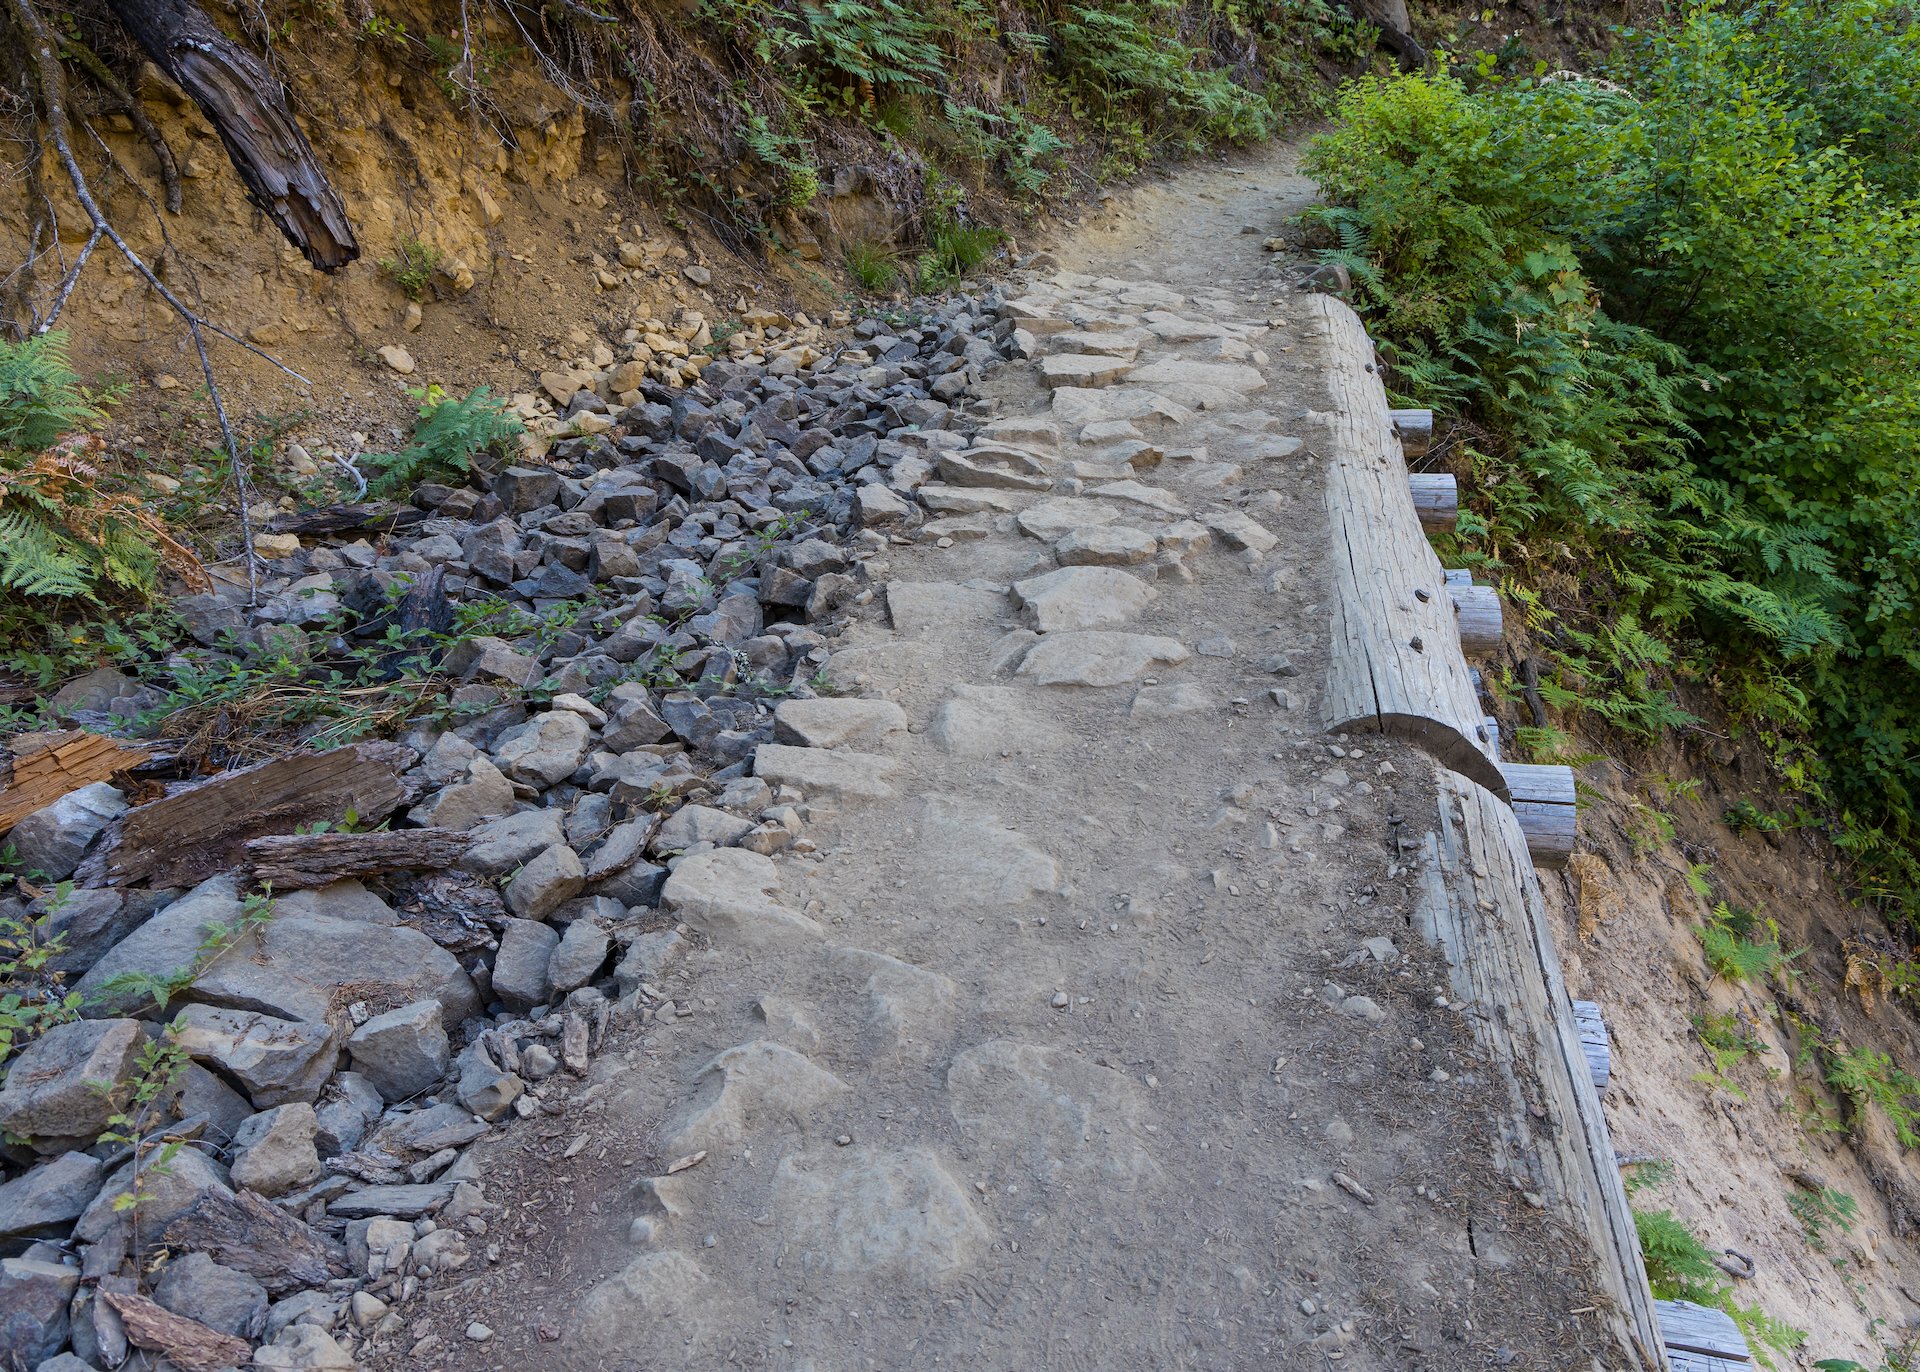  One of the sections of the trail that they had to rebuild after the fire.  